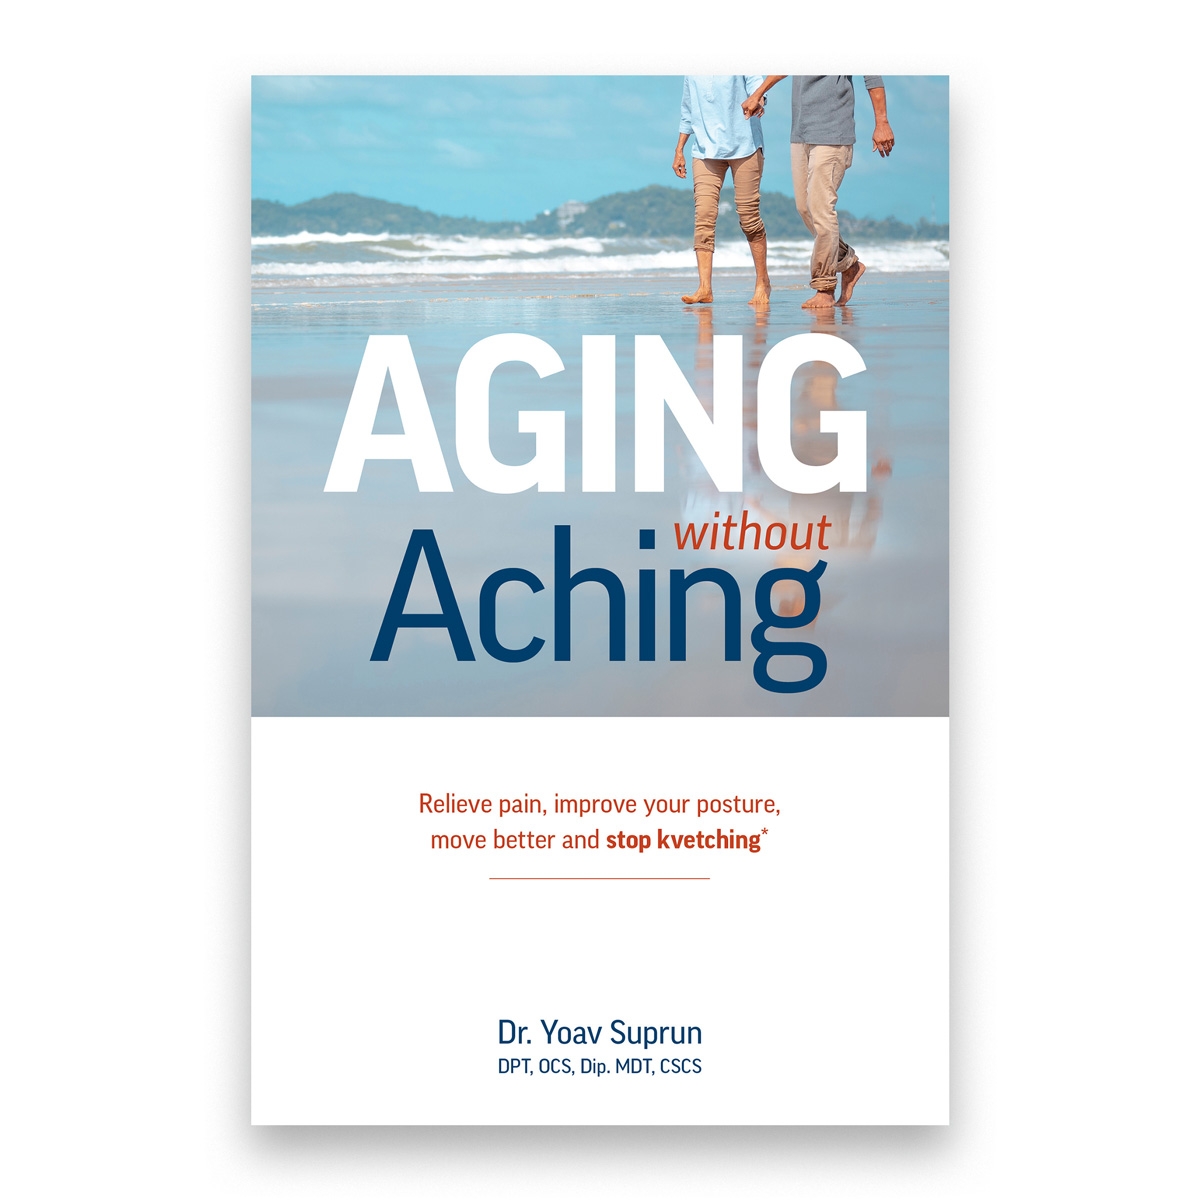 Aging without Aching